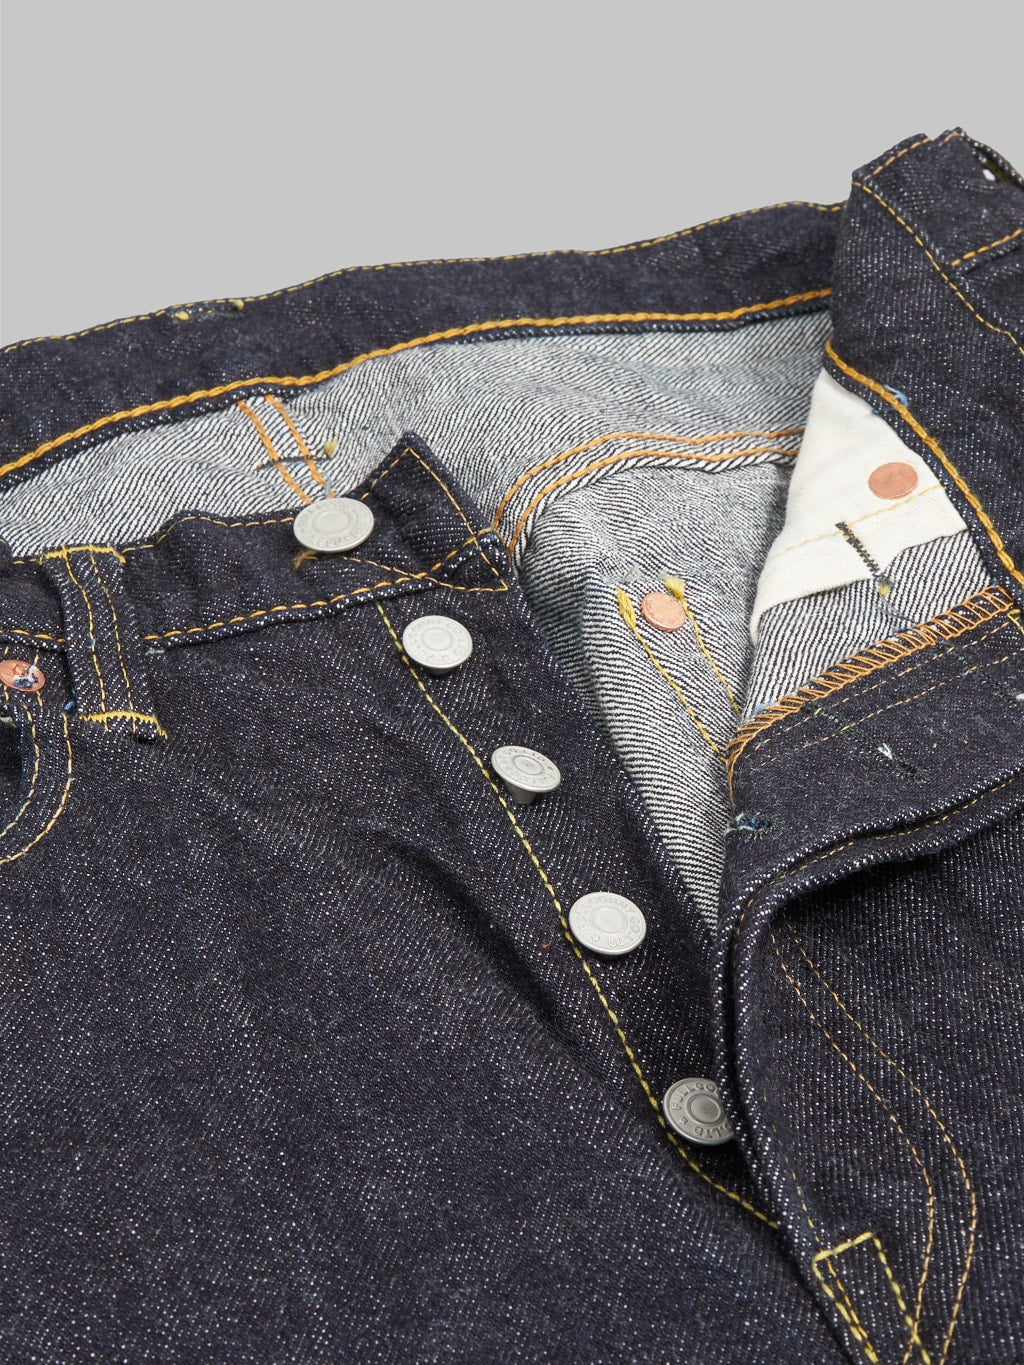 Fullcount 0105XW Wide Straight selvedge Jeans buttons